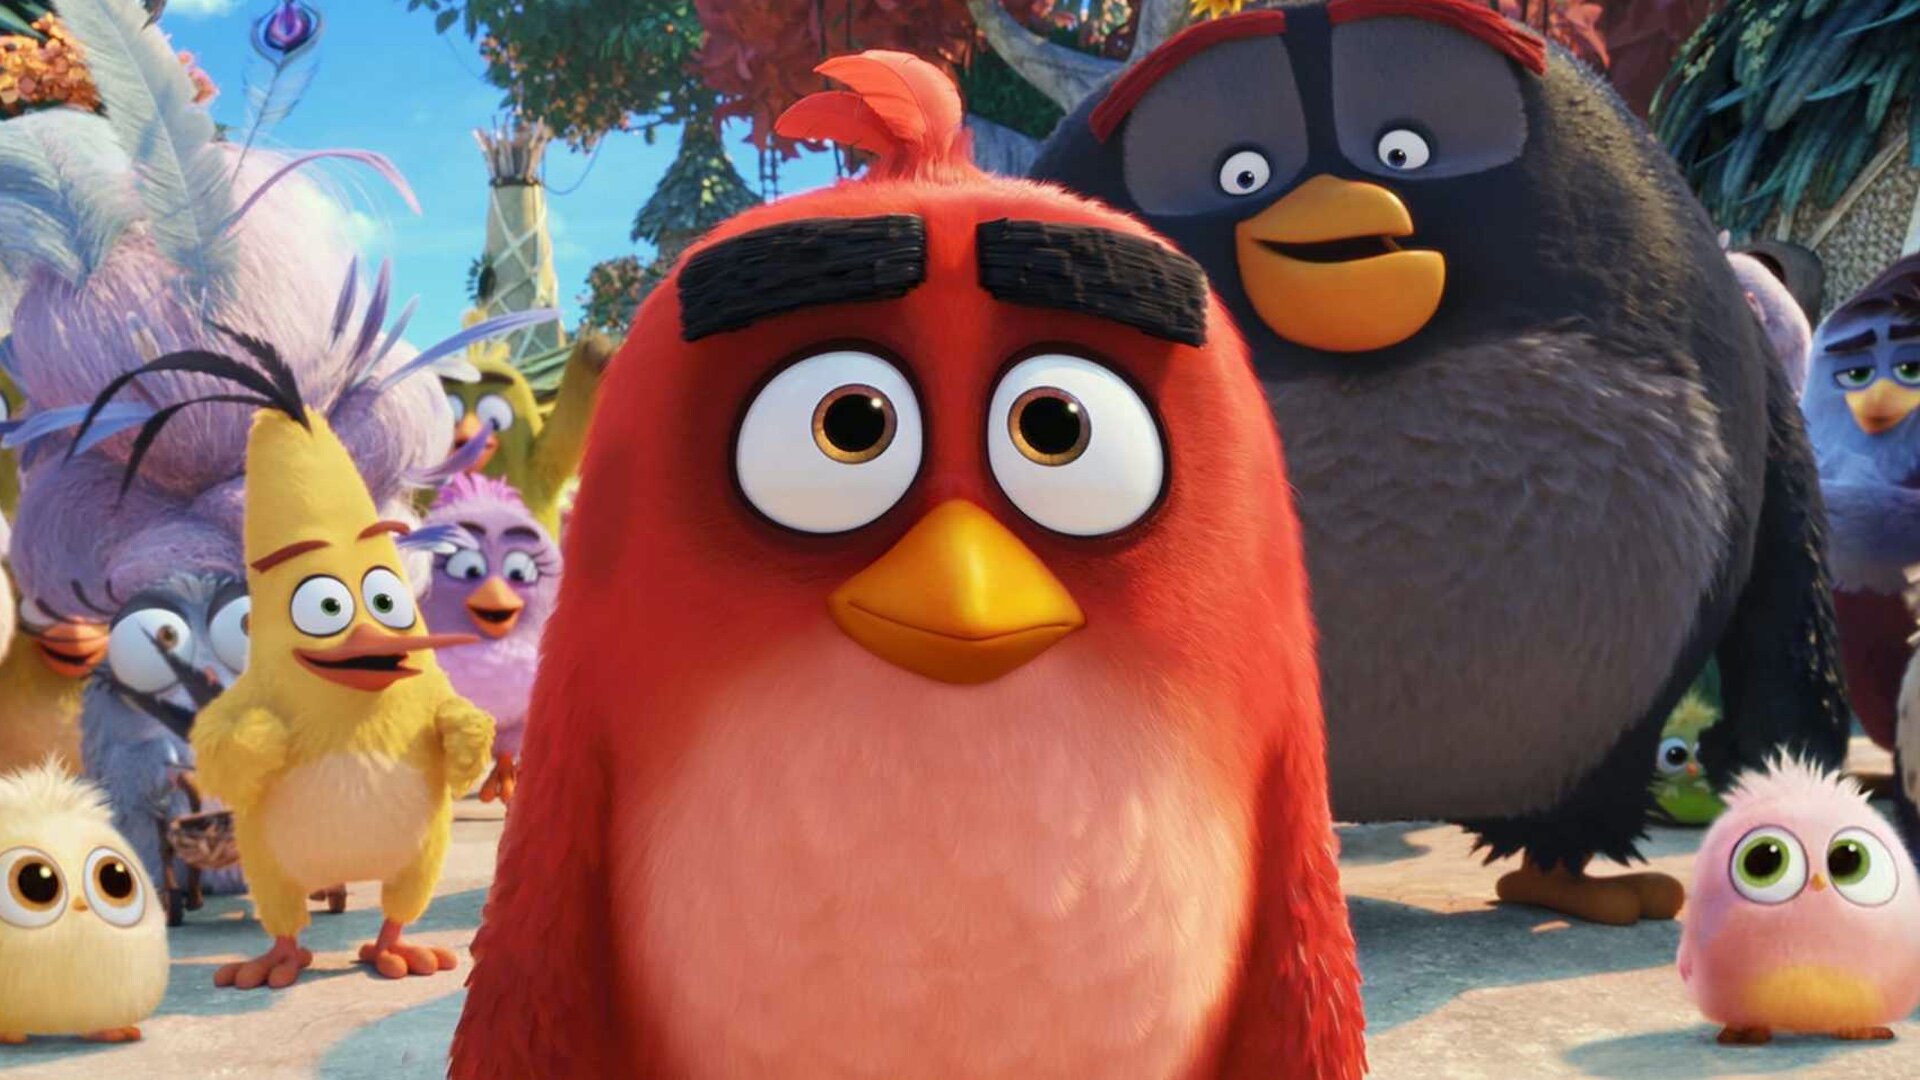 ANGRY BIRDS is Getting an Animated Series at Netflix Titled ANGRY BIRDS: SUMMER MADNESS